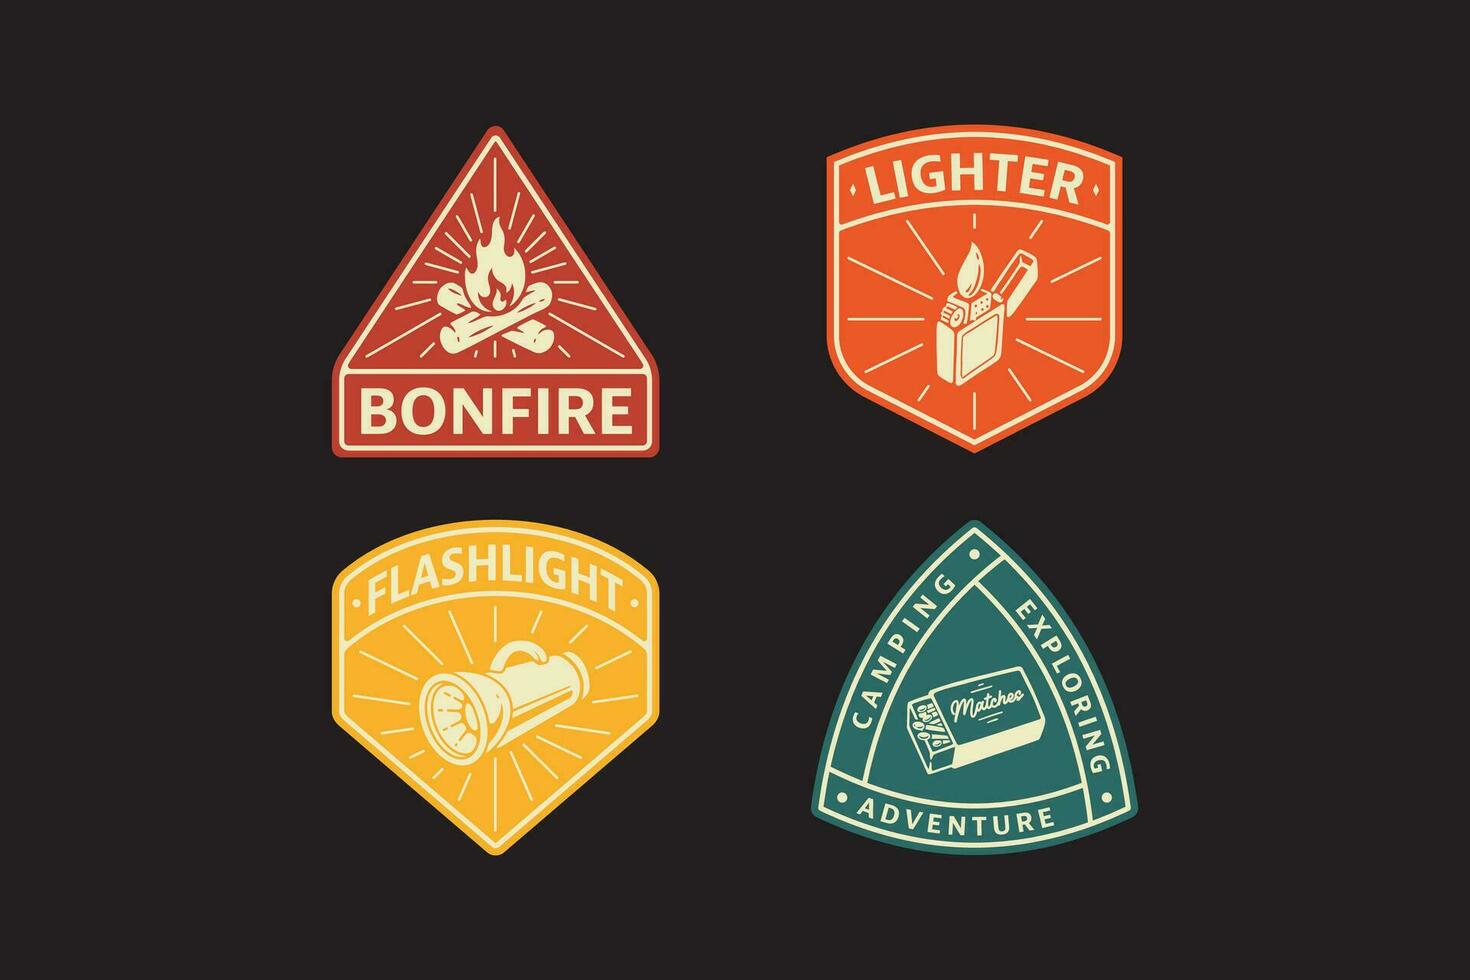 bonfire, lighter, flashlight, match badge logo vector collection for adventure and camping